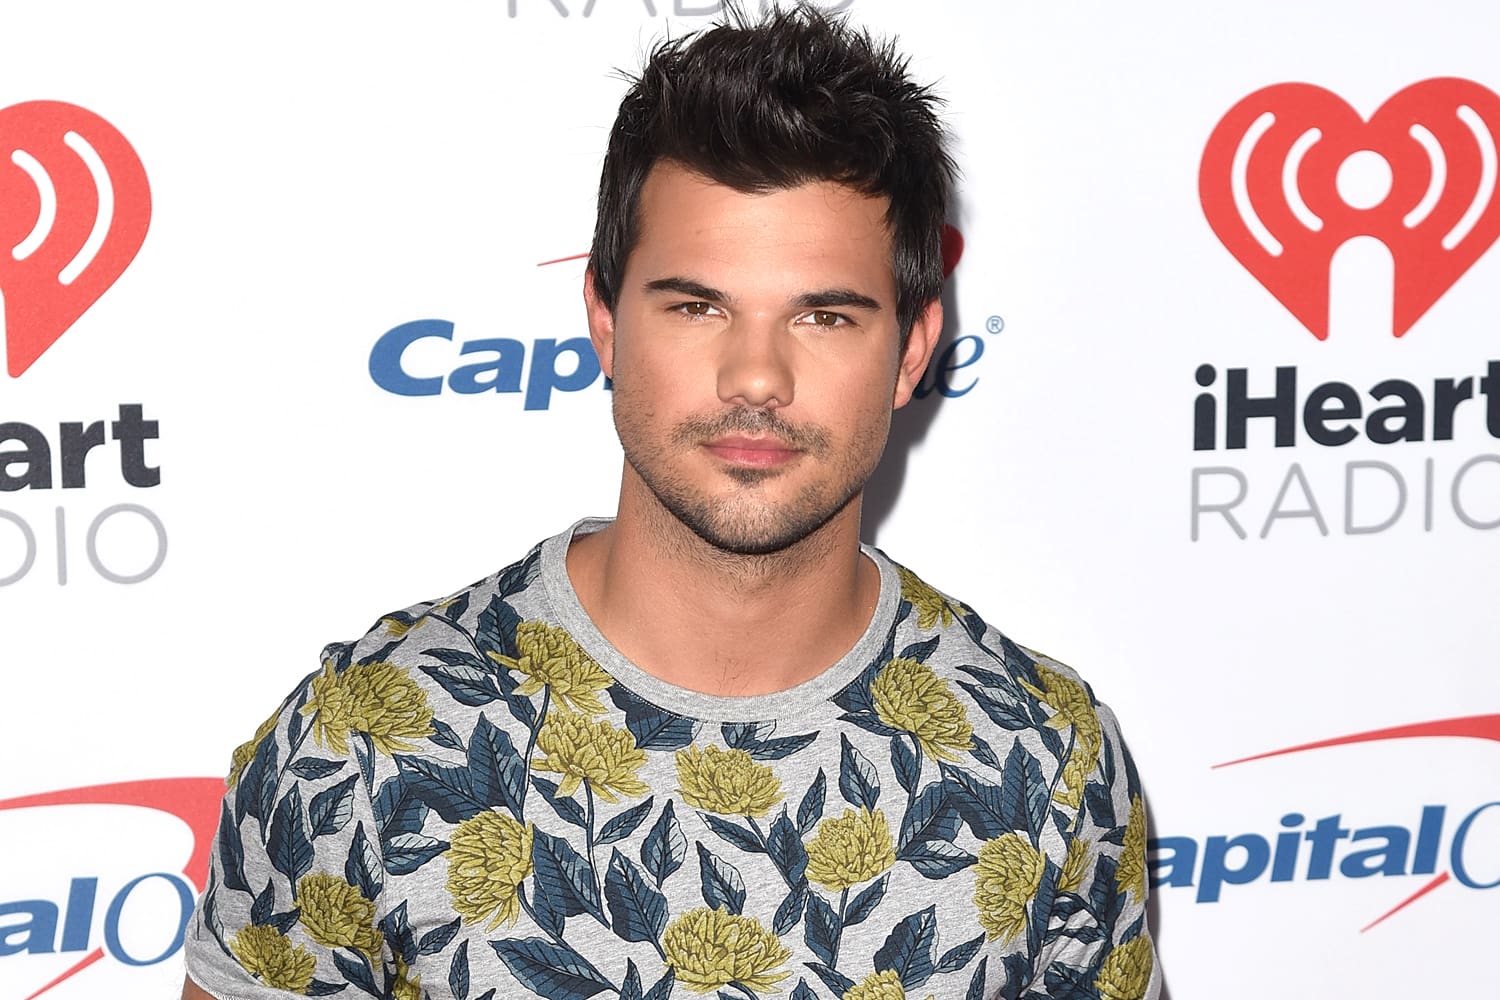 Taylor Lautner Talks About Why He Took A Break Following The Twilight Saga